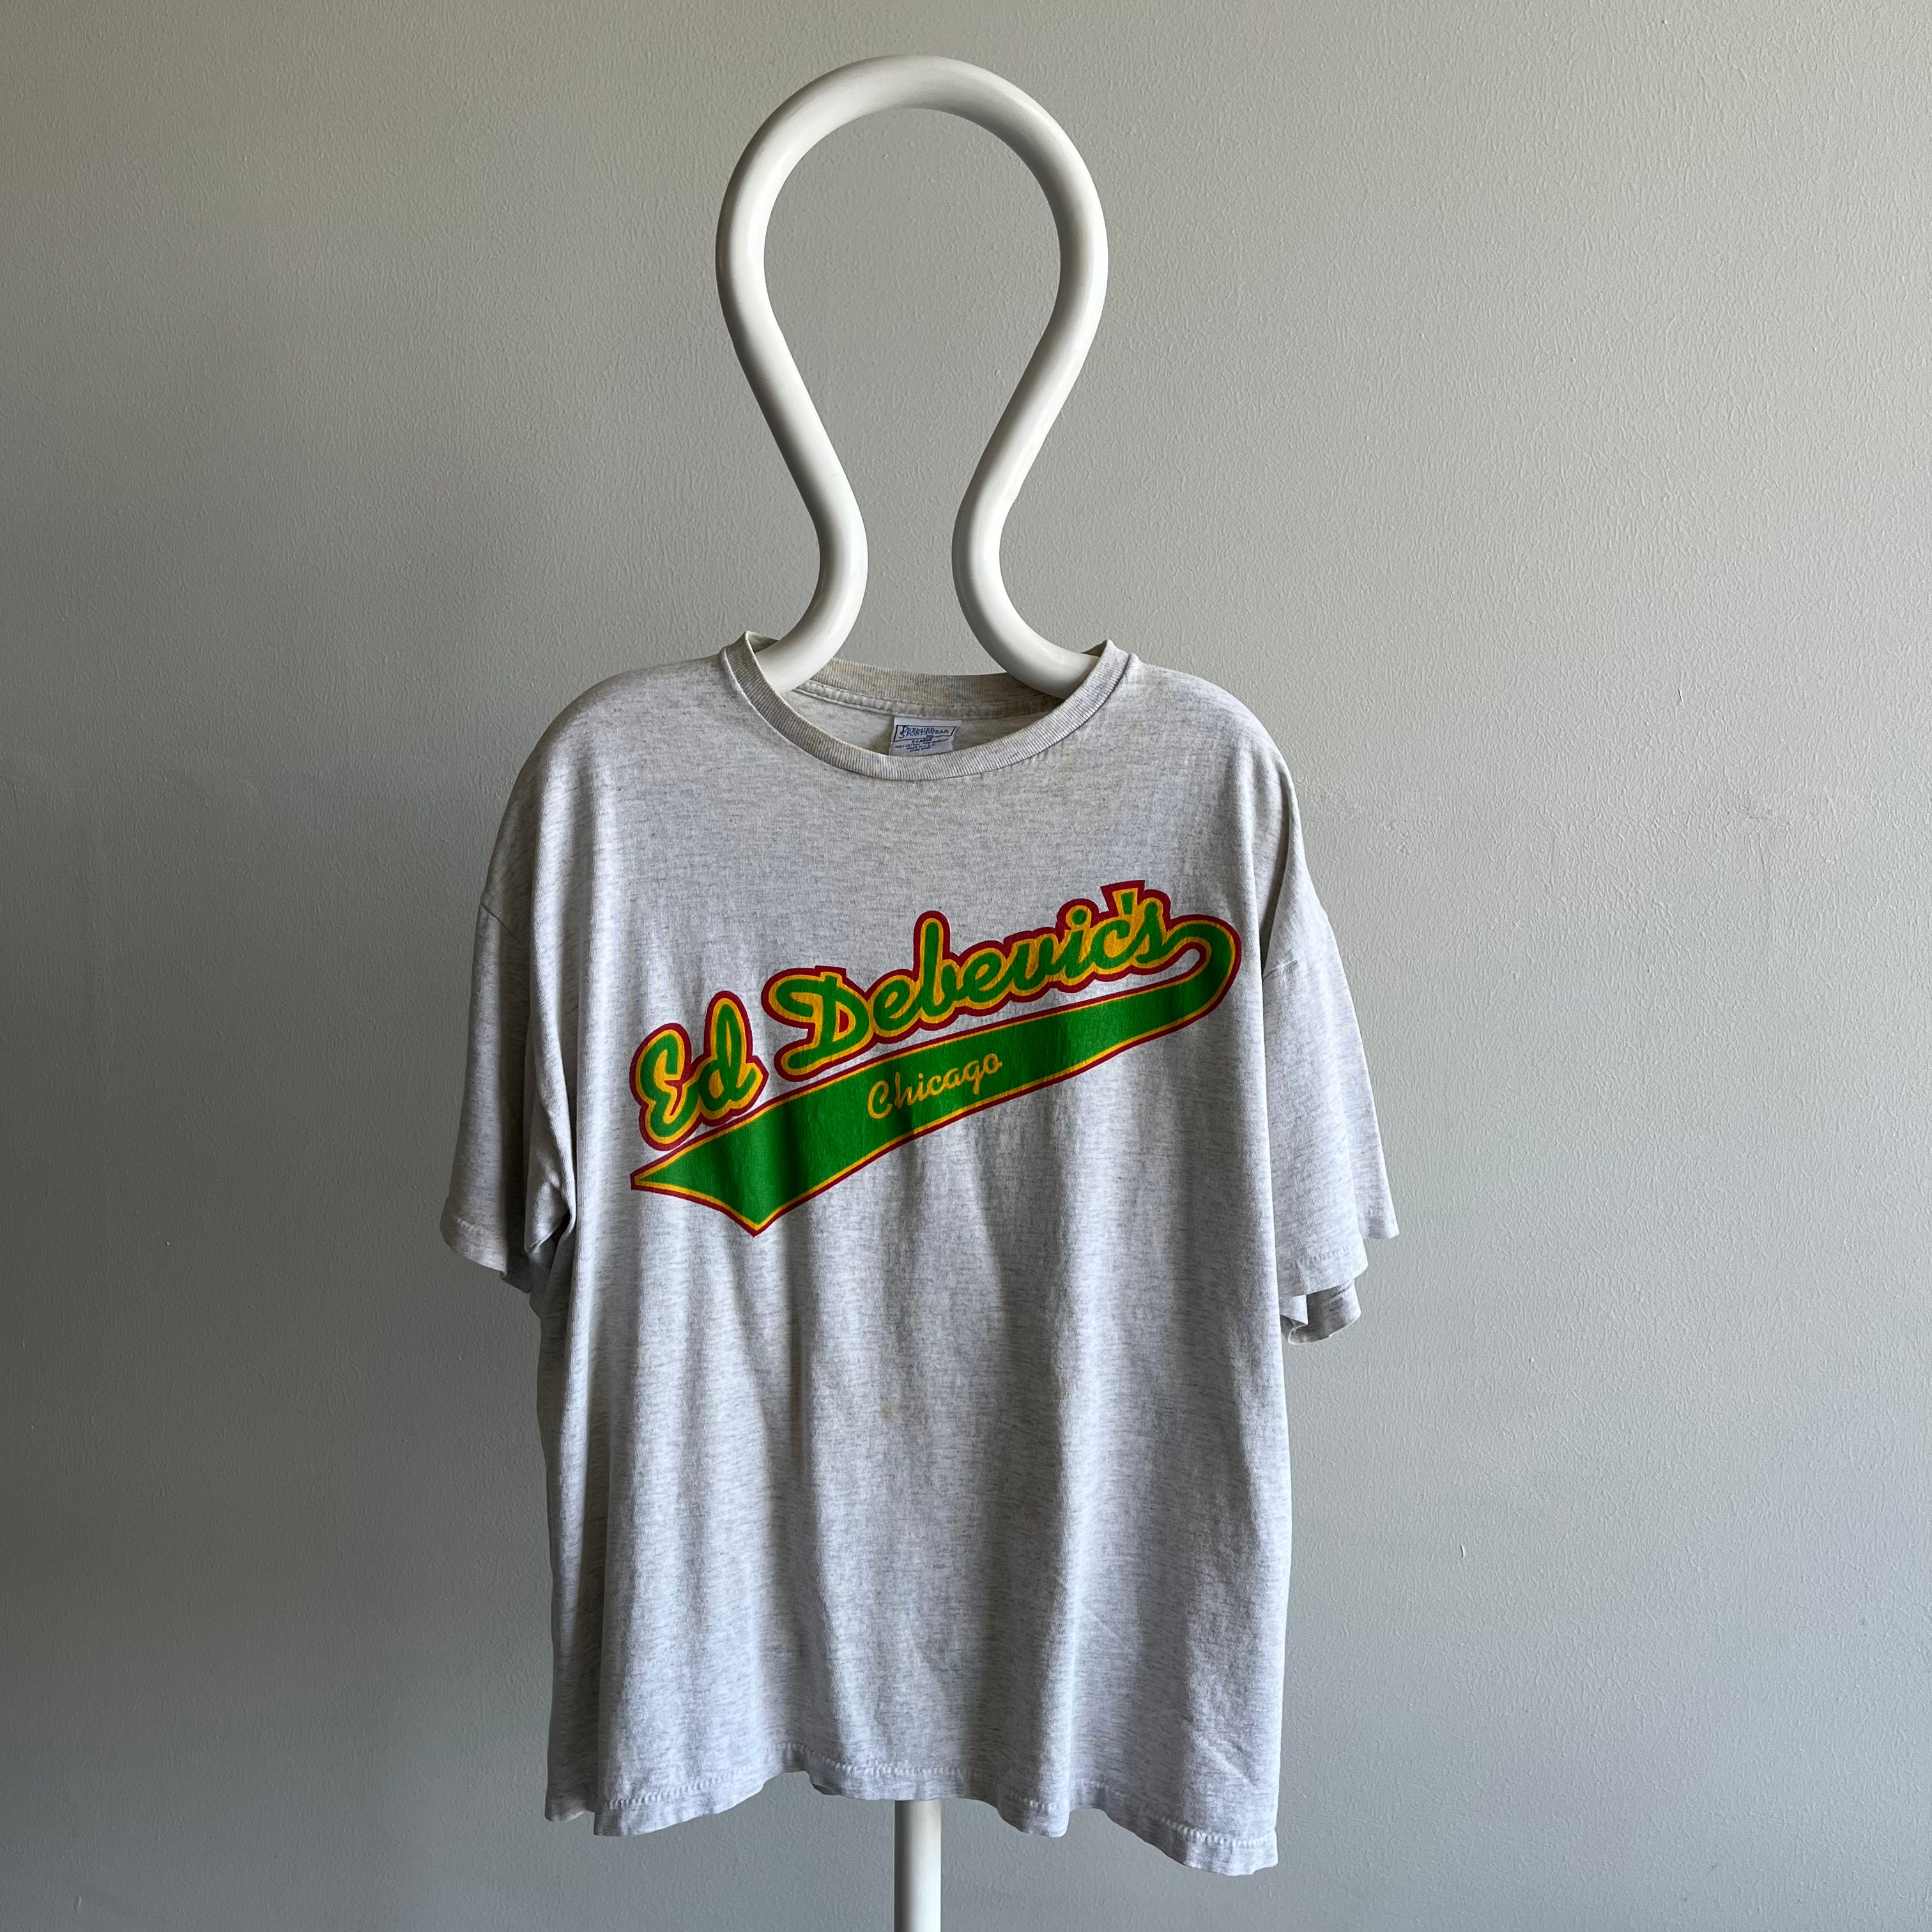 1990s Ed Debevic's Chicago Stained T-Shirt